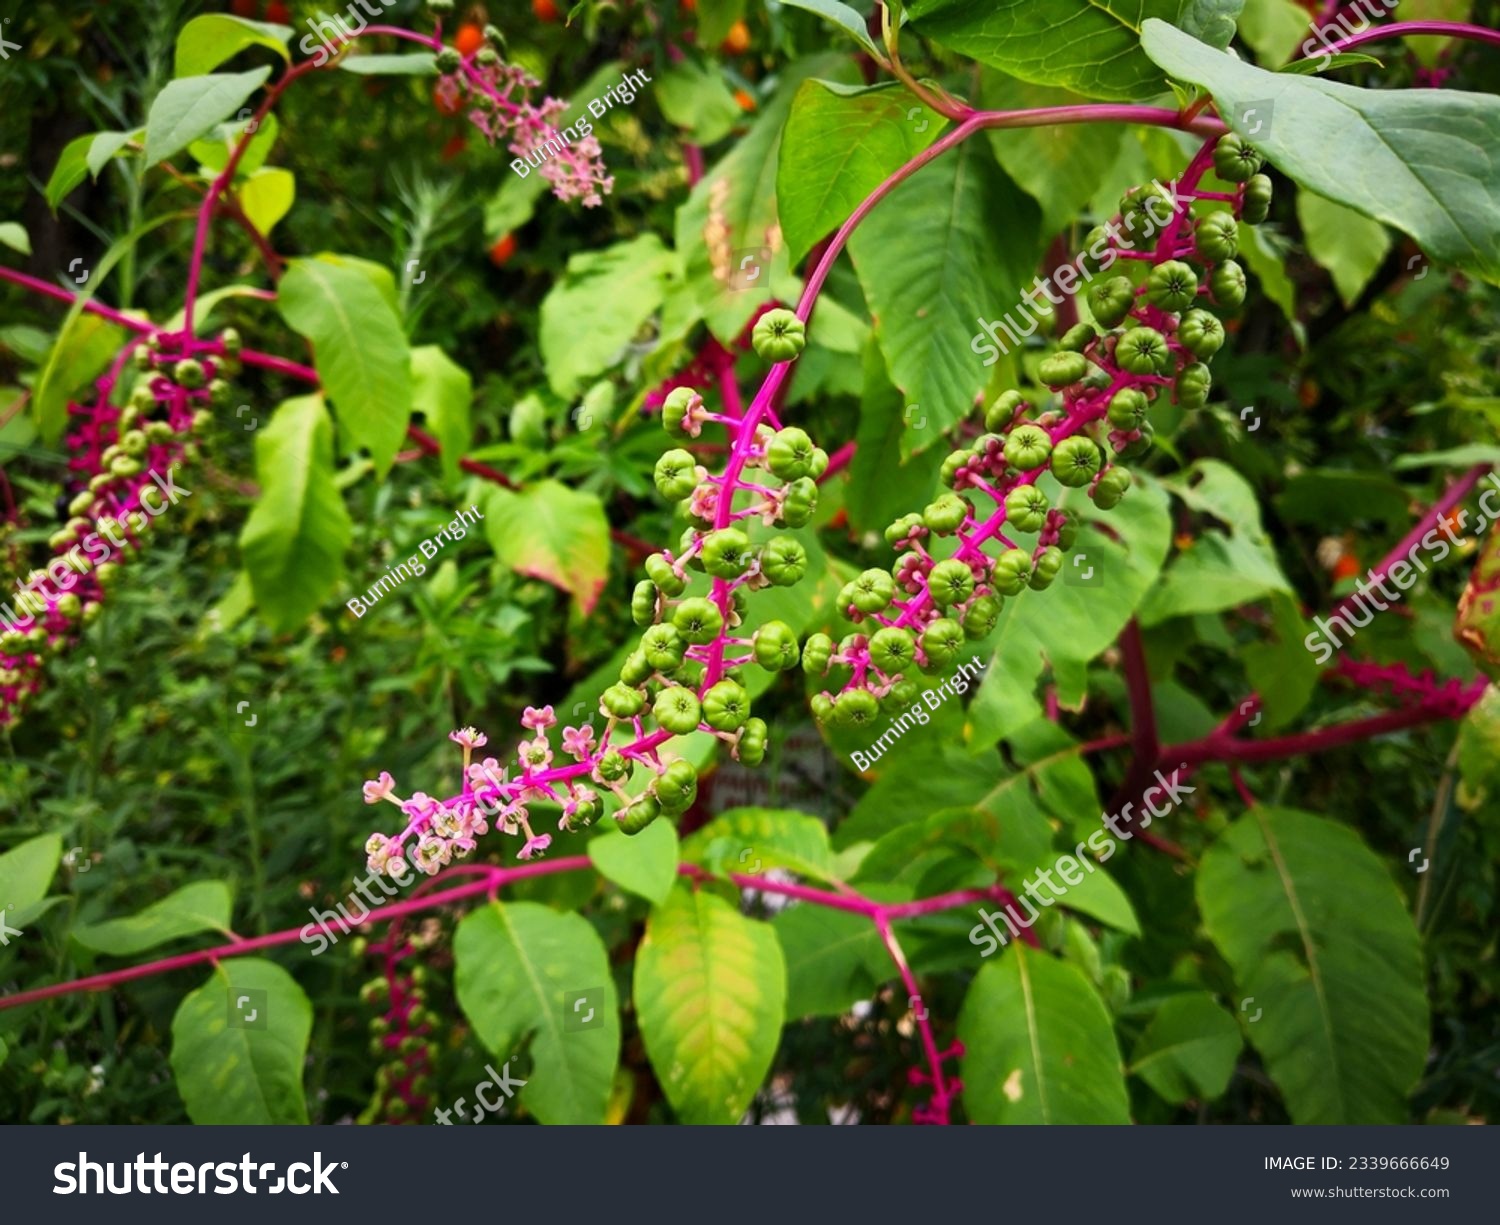 Twig of American pokeweed (Phytolacca americana, poke sallet, inkberry, nightshade, pokeroot, redweed, pigeonberry, pocan bush, red ink plant, Virginian red stem pokeberry) with flowers and berries #2339666649